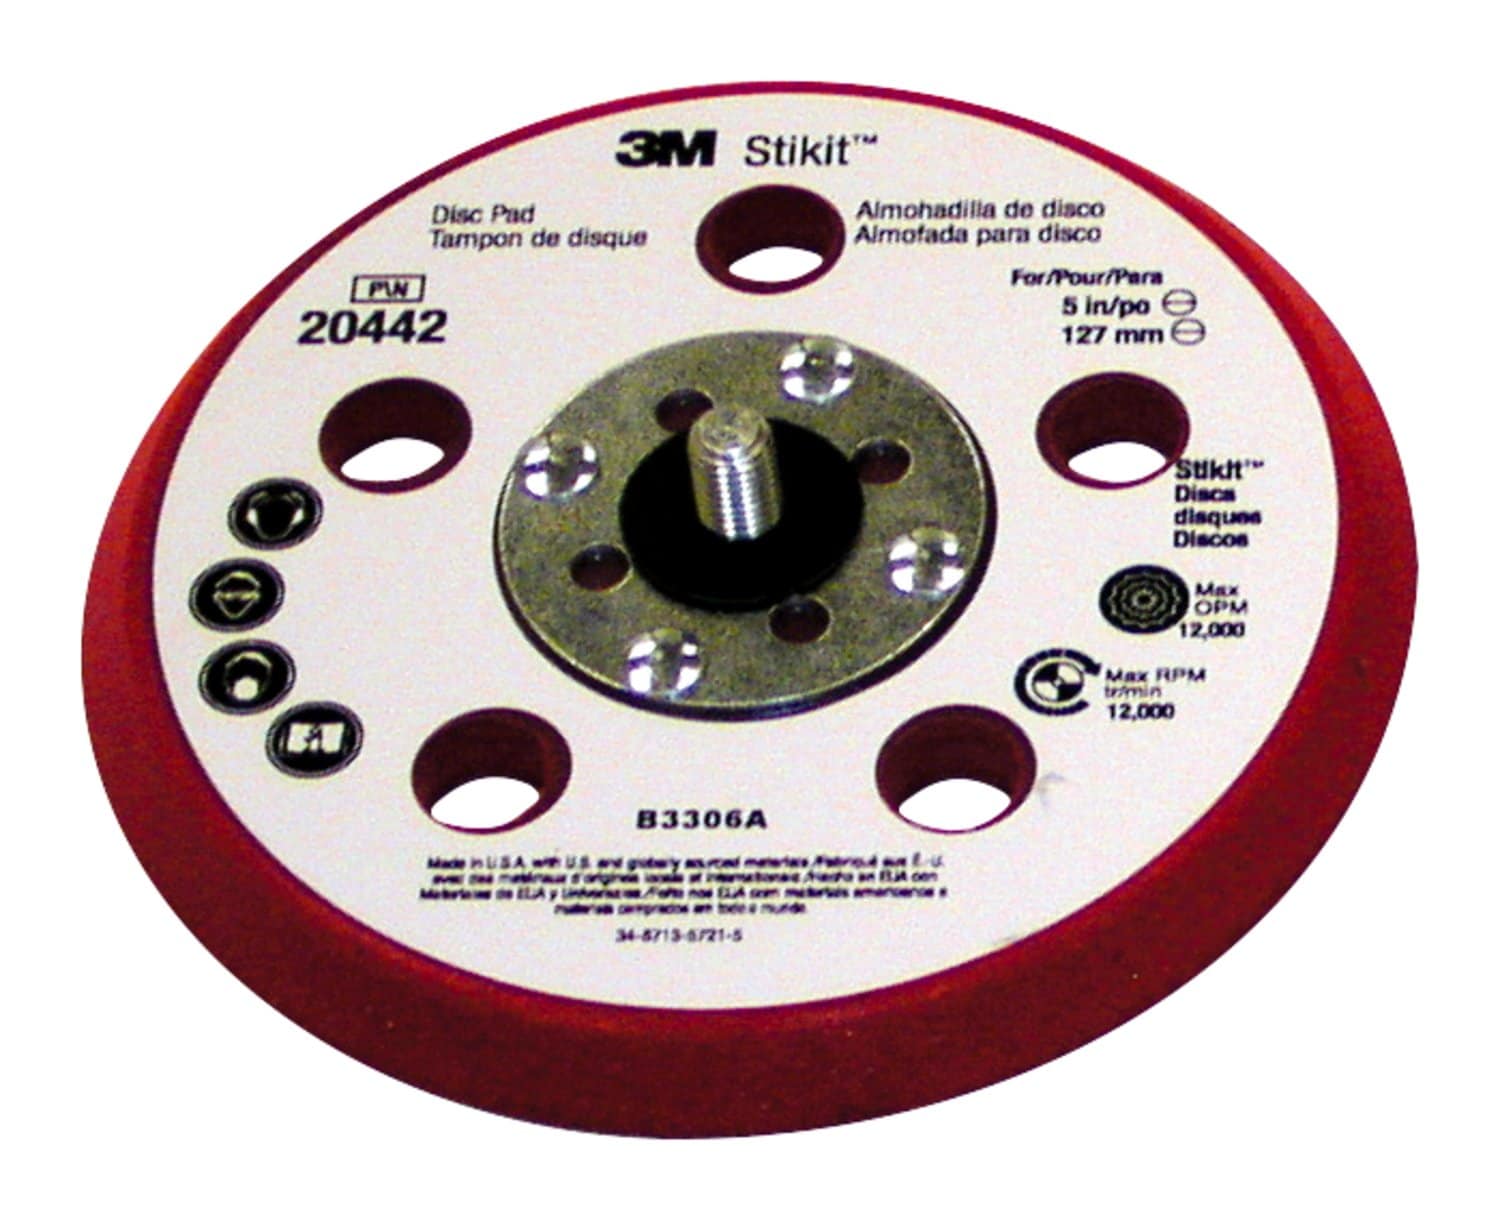 7100044784 - 3M Stikit D/F Low Profile Disc Pad 20442, 5 in x 3/8 in x 5/16-24
External, 10 ea/Case